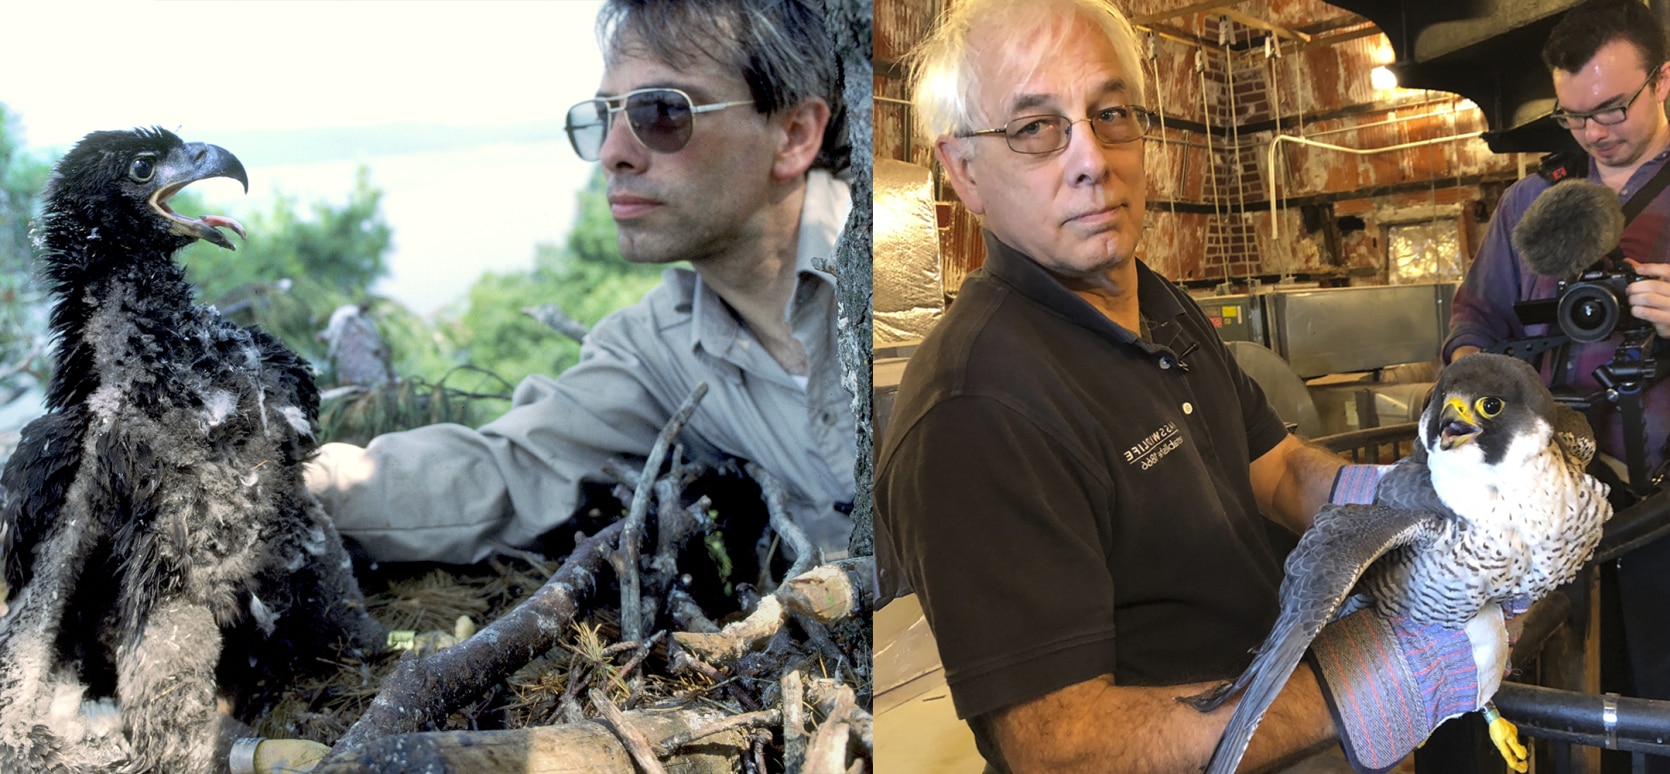 On the left: Dr. French with bald eagle chick in 1989. On the right: Dr. French with a peregrine falcon in 2018.